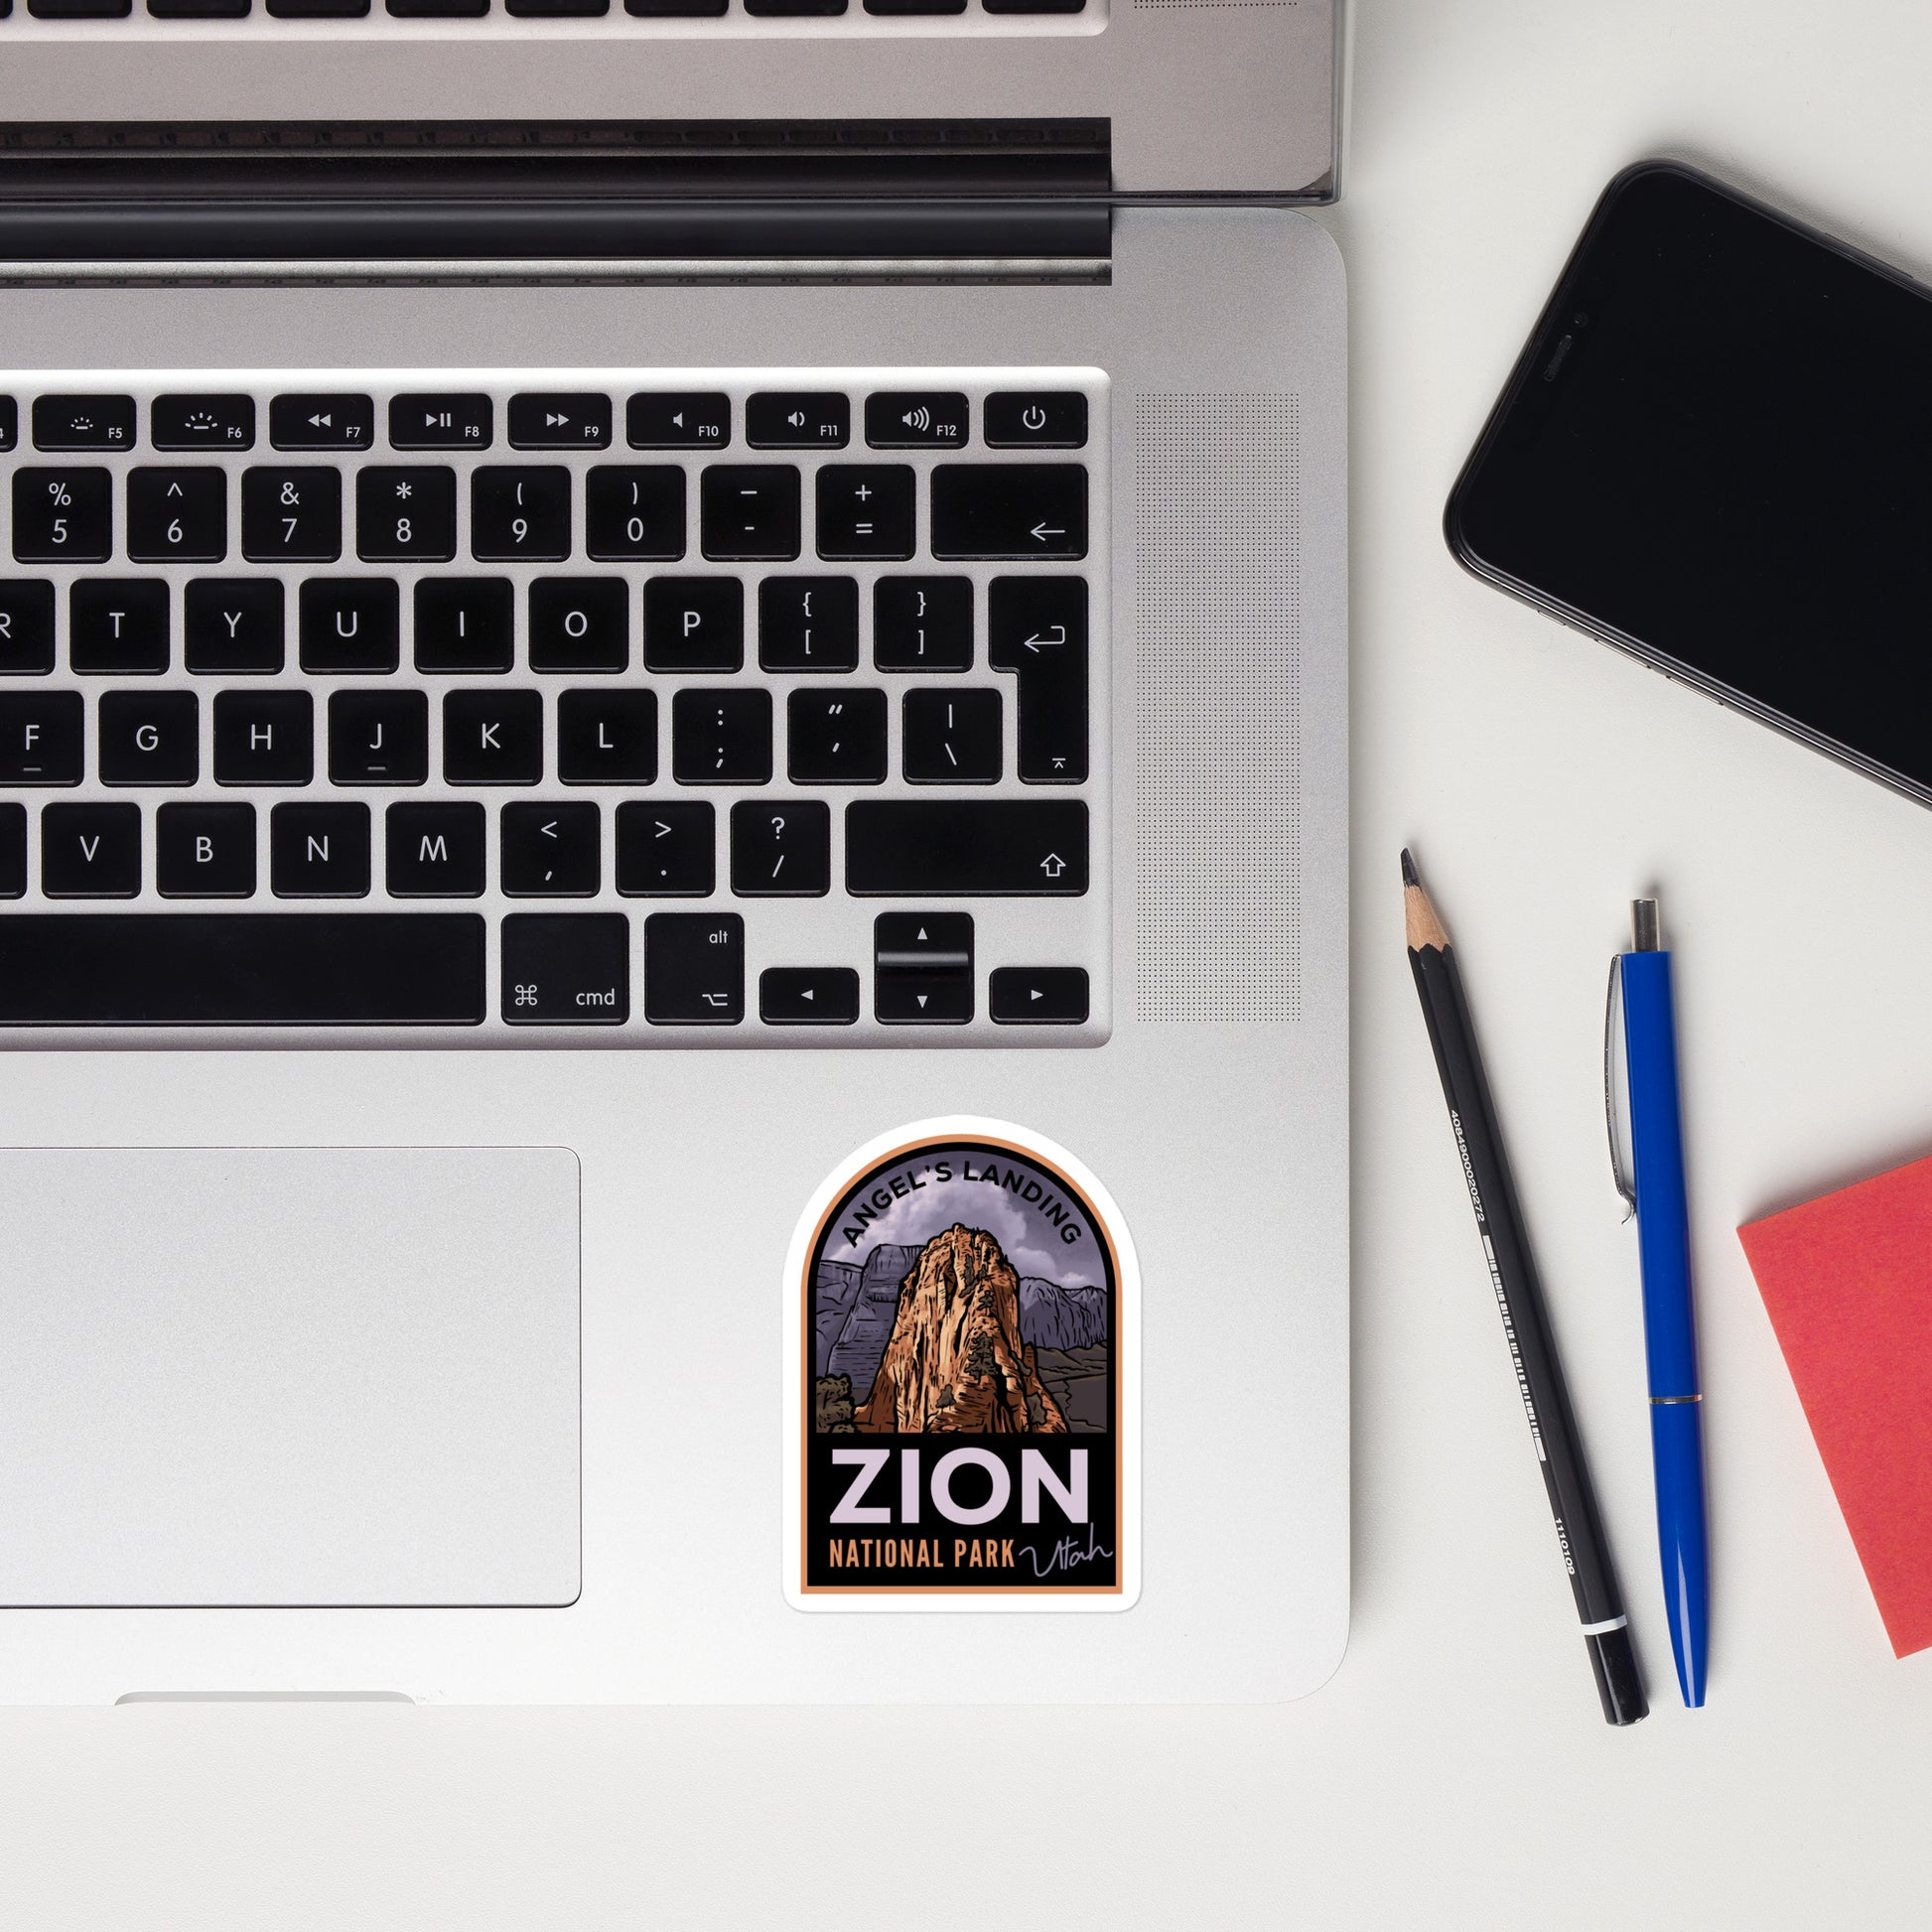 A 3 inch tall sticker of Zion National Park on a laptop